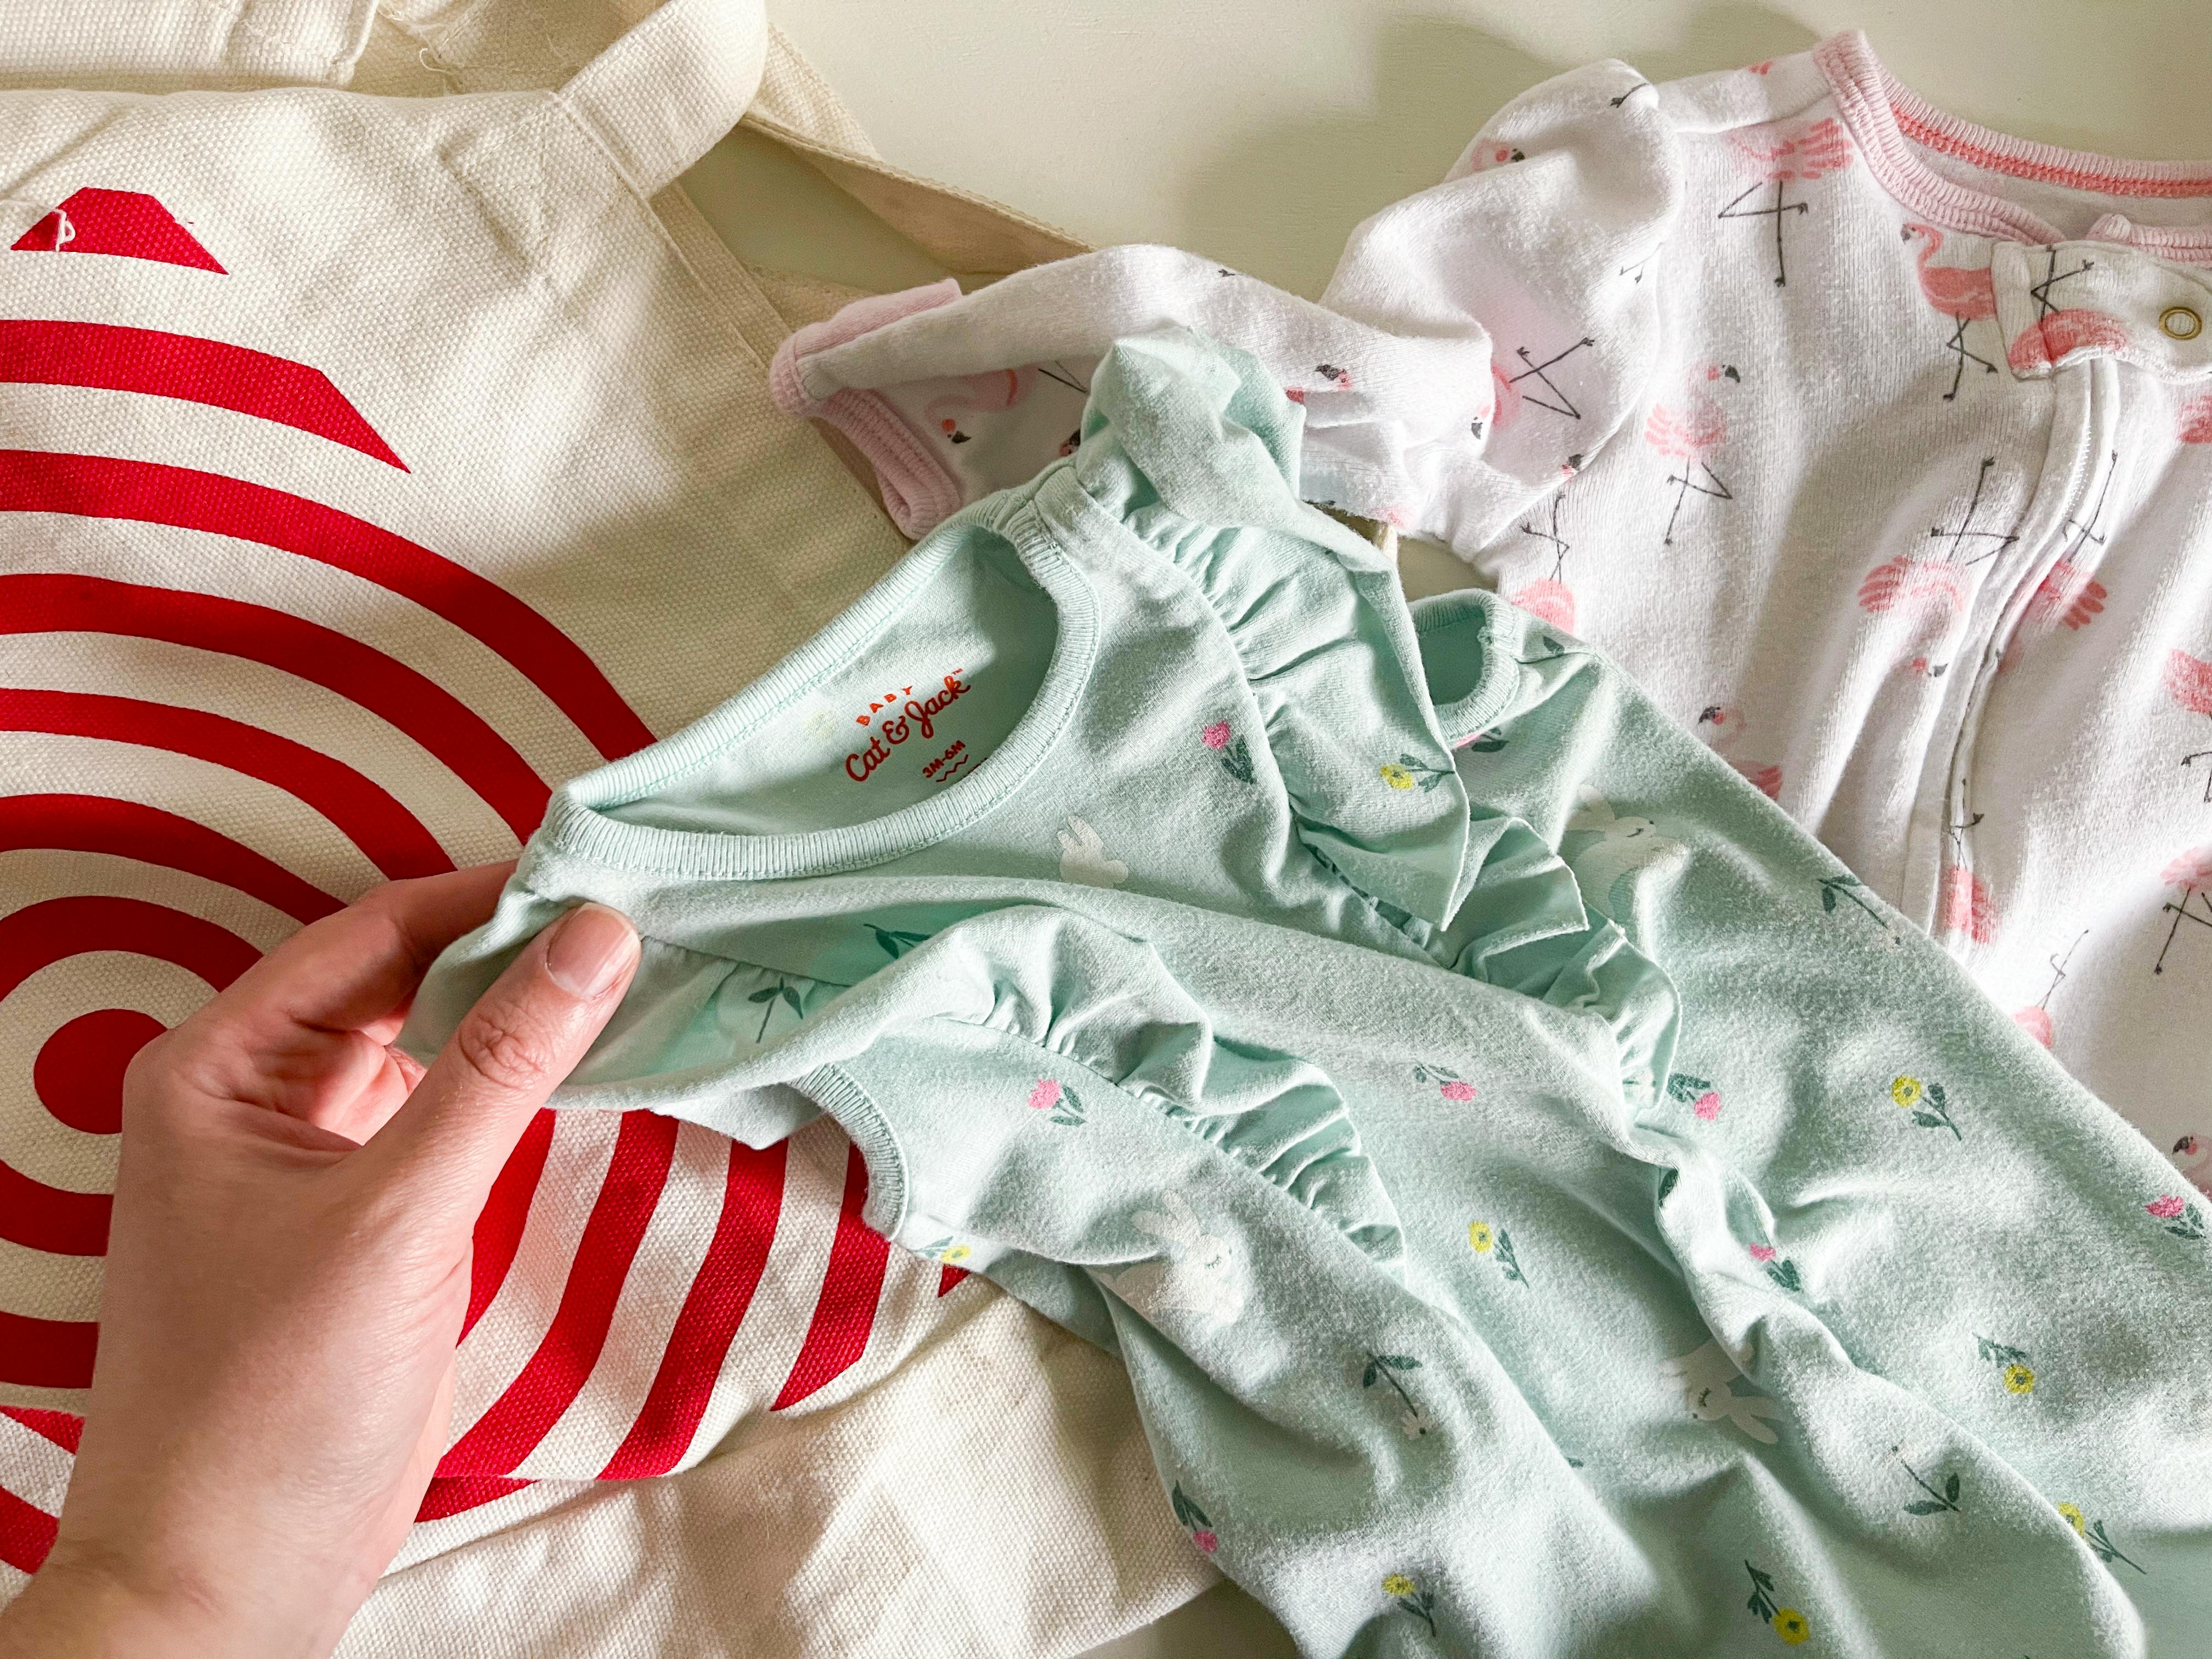 Two baby outfits laying next to a target bag. One of the outfits is being lifted with the label reading cat and Jack clearly visible.